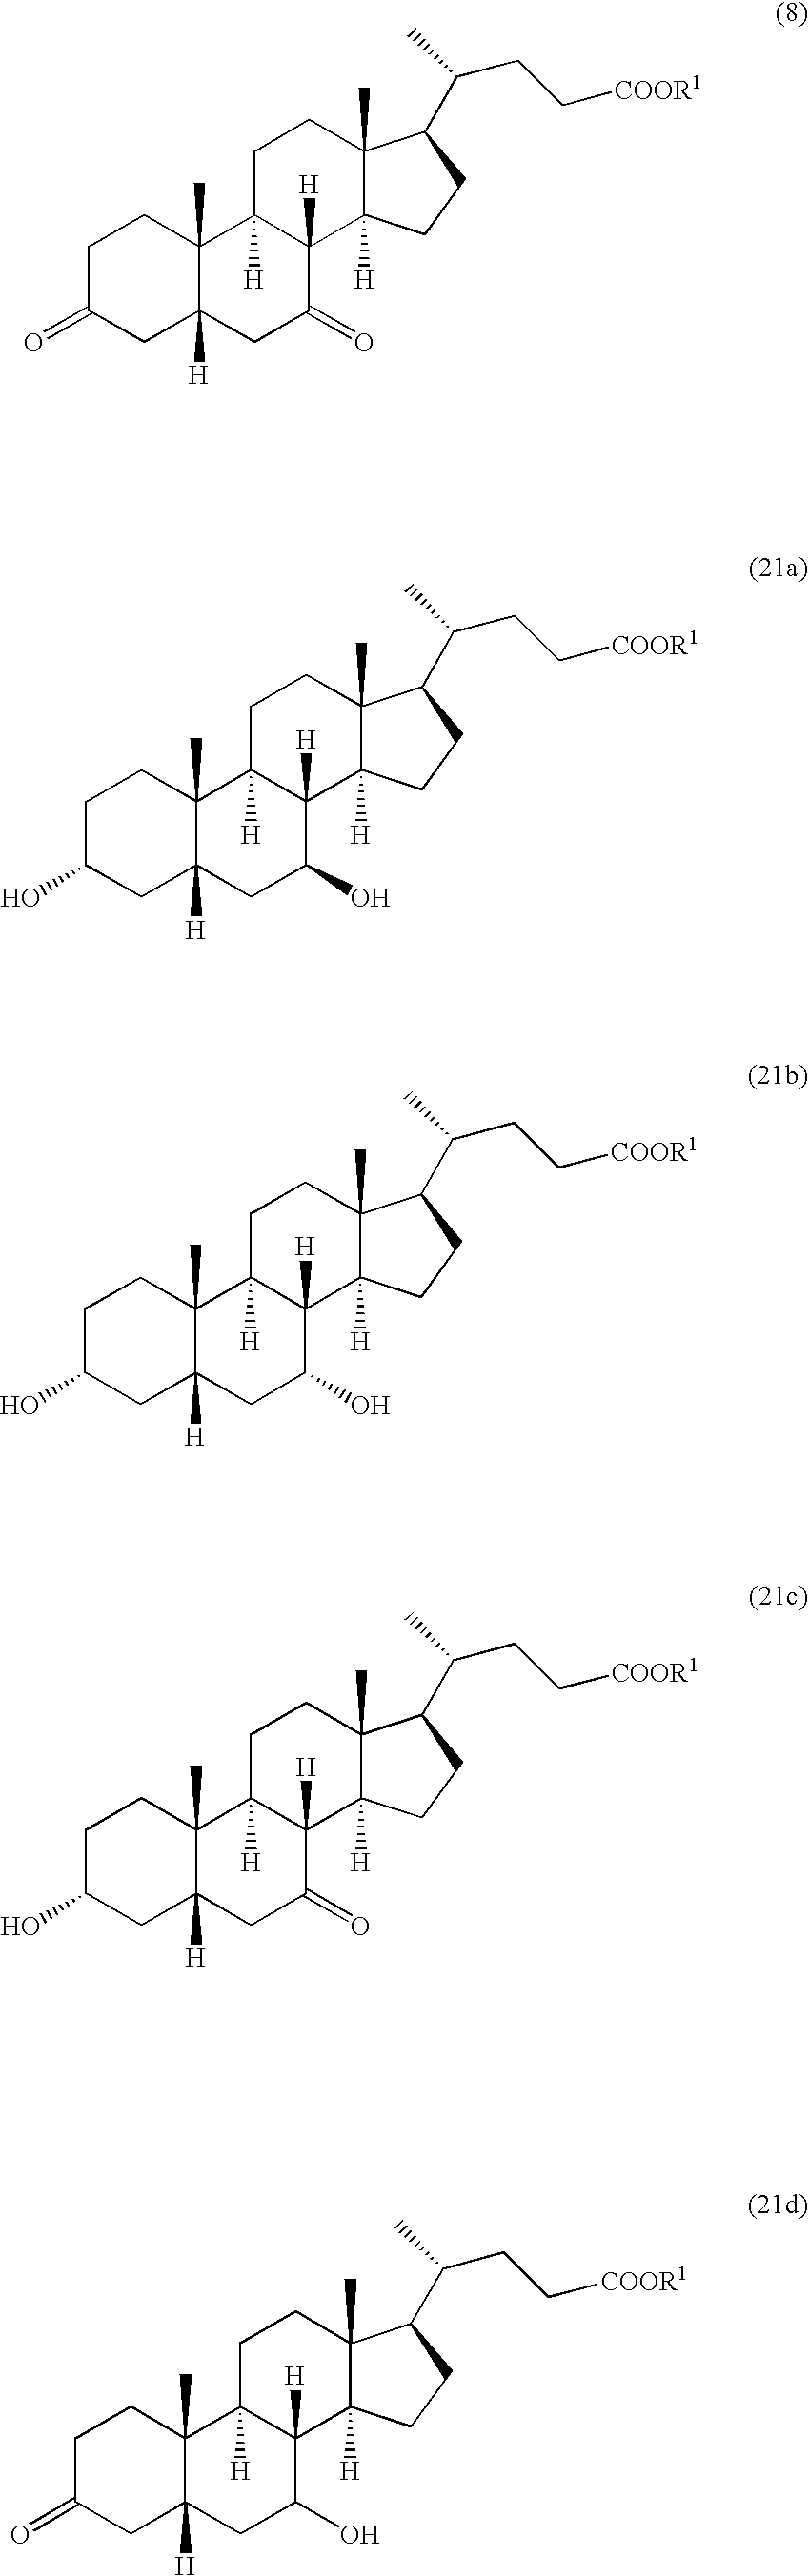 Production method of steroid compound